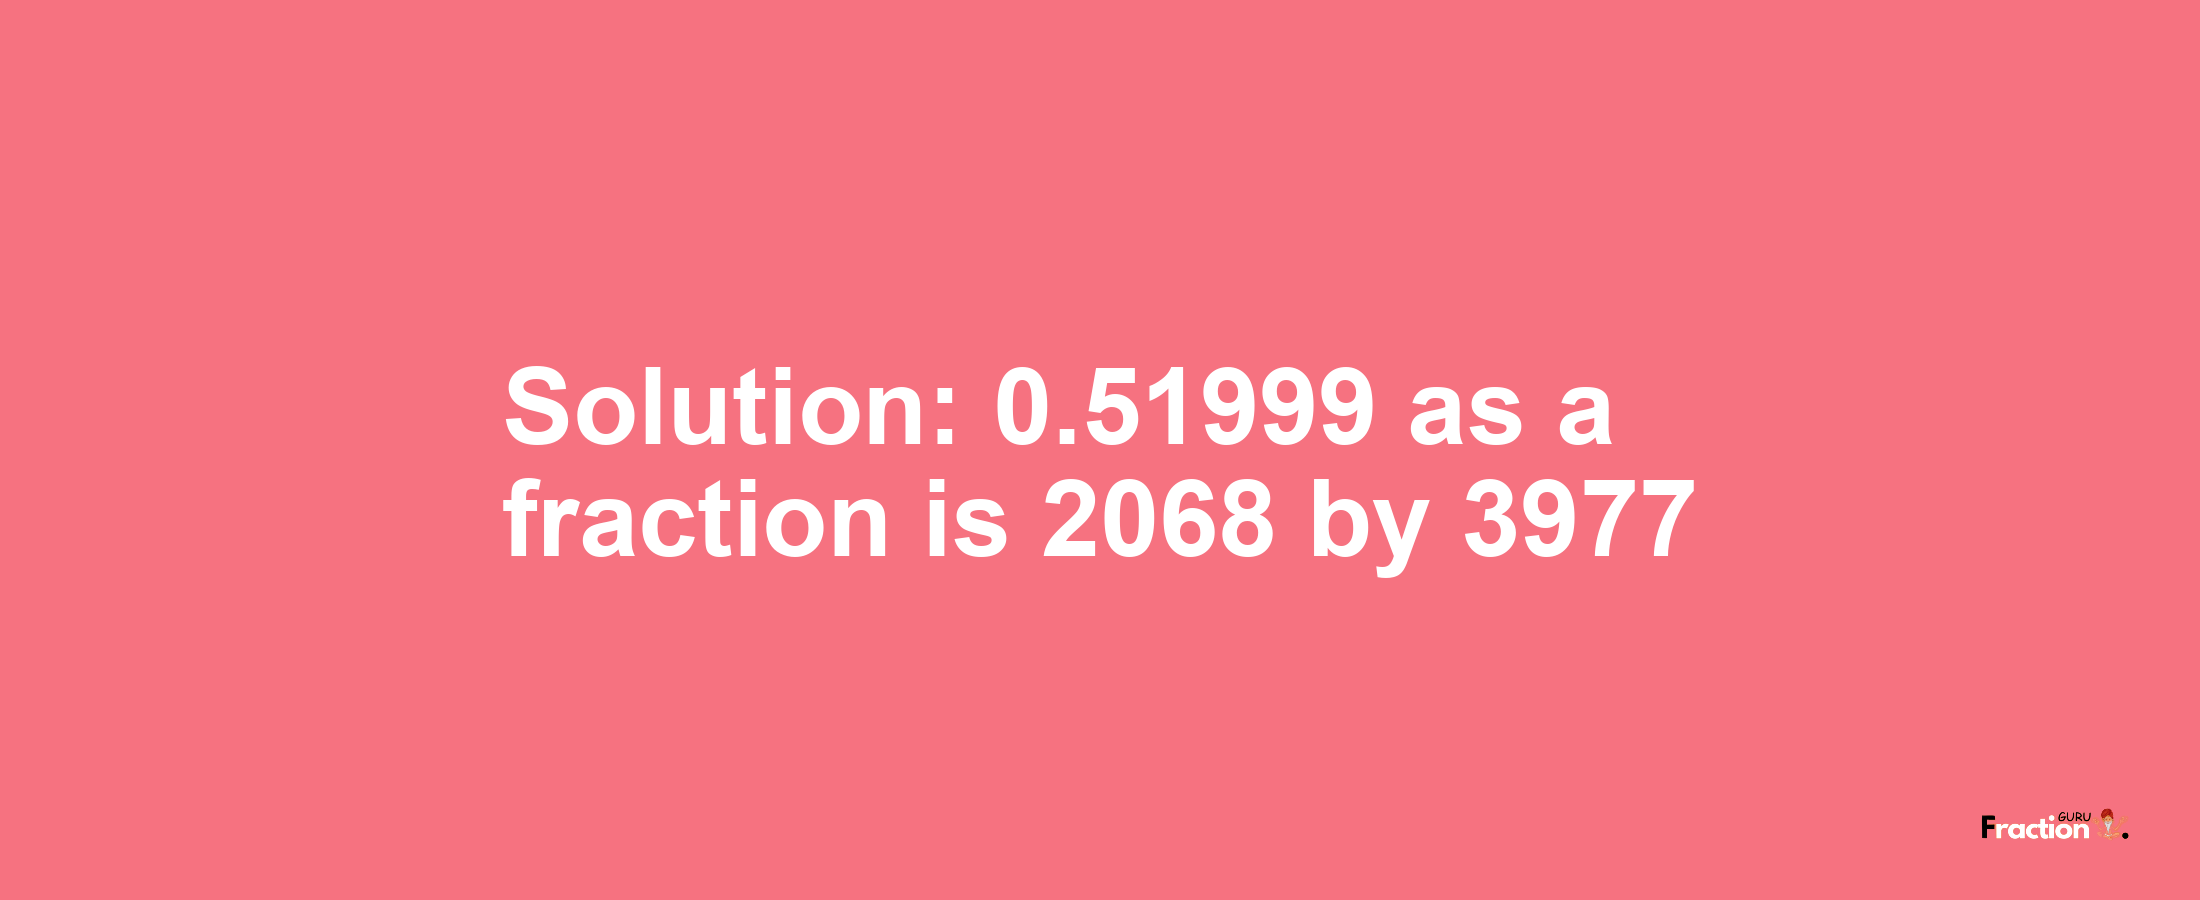 Solution:0.51999 as a fraction is 2068/3977